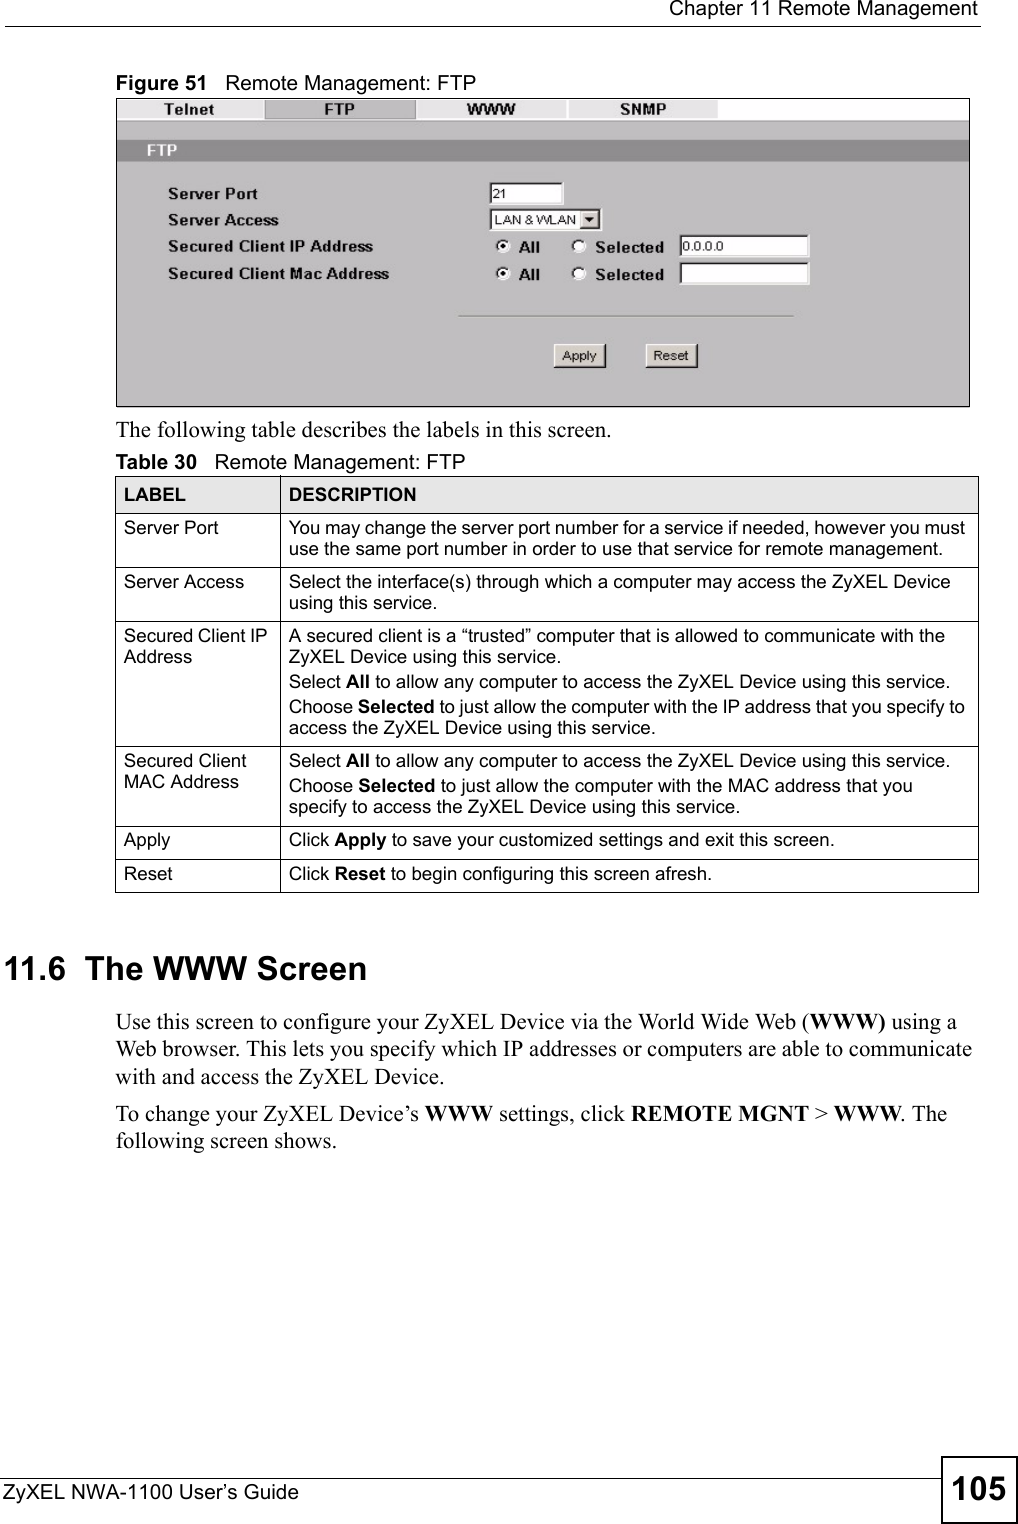  Chapter 11 Remote ManagementZyXEL NWA-1100 User’s Guide 105Figure 51   Remote Management: FTPThe following table describes the labels in this screen.11.6  The WWW ScreenUse this screen to configure your ZyXEL Device via the World Wide Web (WWW) using a Web browser. This lets you specify which IP addresses or computers are able to communicate with and access the ZyXEL Device. To change your ZyXEL Device’s WWW settings, click REMOTE MGNT &gt; WWW. The following screen shows.Table 30   Remote Management: FTPLABEL DESCRIPTIONServer Port You may change the server port number for a service if needed, however you must use the same port number in order to use that service for remote management.Server Access Select the interface(s) through which a computer may access the ZyXEL Device using this service.Secured Client IP AddressA secured client is a “trusted” computer that is allowed to communicate with the ZyXEL Device using this service. Select All to allow any computer to access the ZyXEL Device using this service.Choose Selected to just allow the computer with the IP address that you specify to access the ZyXEL Device using this service.Secured Client MAC AddressSelect All to allow any computer to access the ZyXEL Device using this service.Choose Selected to just allow the computer with the MAC address that you specify to access the ZyXEL Device using this service.Apply Click Apply to save your customized settings and exit this screen. Reset Click Reset to begin configuring this screen afresh.